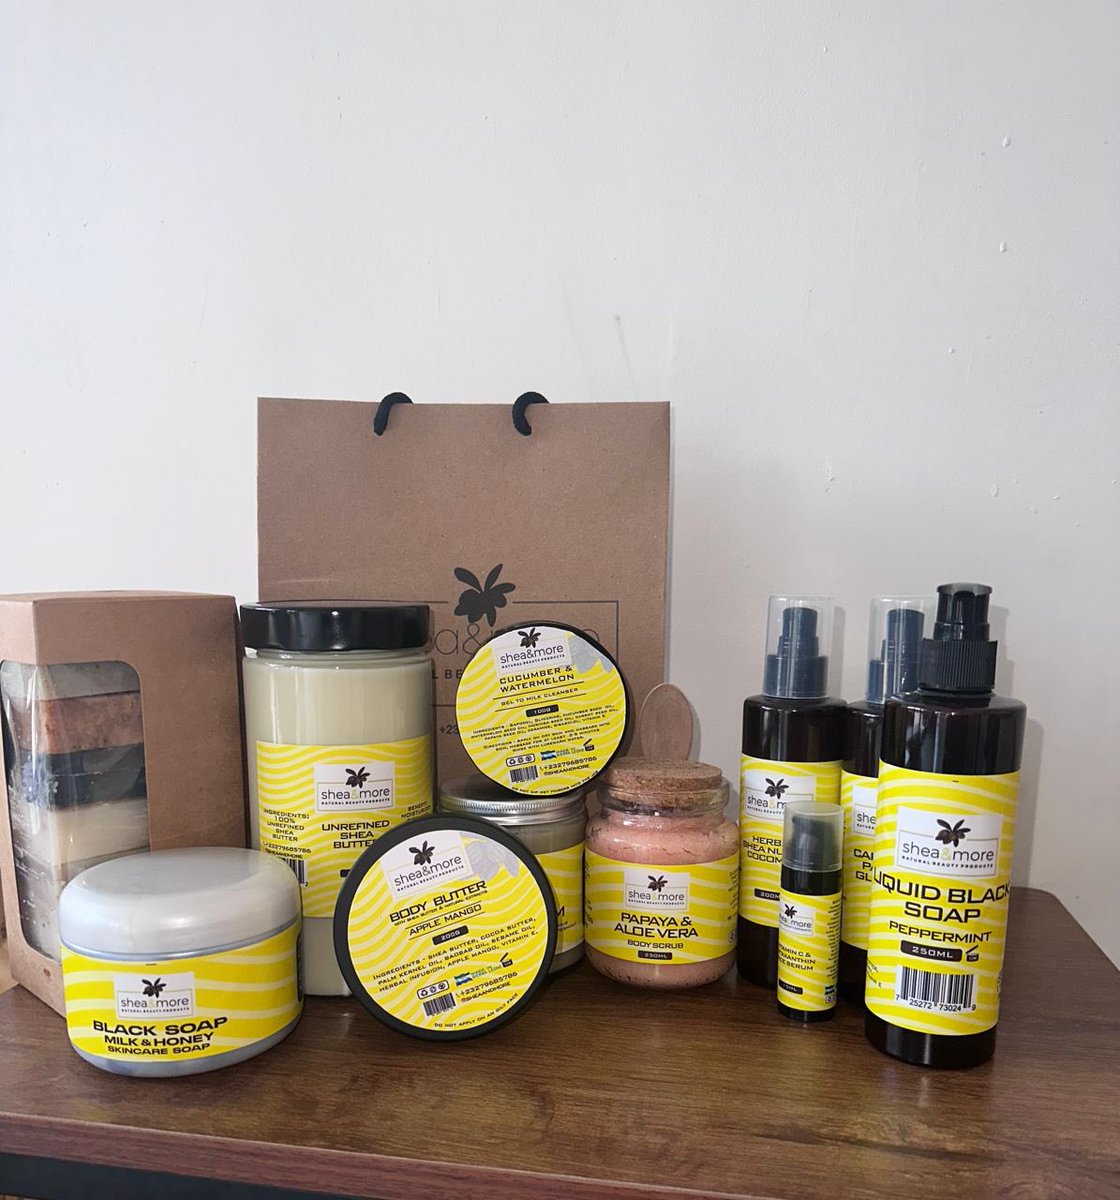 Shea and More natural beauty cosmetics is a skin and hair care brand that uses mostly locally grown ingredients to produce clean, safe, and elegant beauty products. 

#OrganicBeauty #NaturalSkincare #SheaButterMagic #EcoFriendlyLiving #GreenBeauty #NourishYourSkin #HealthyChoices